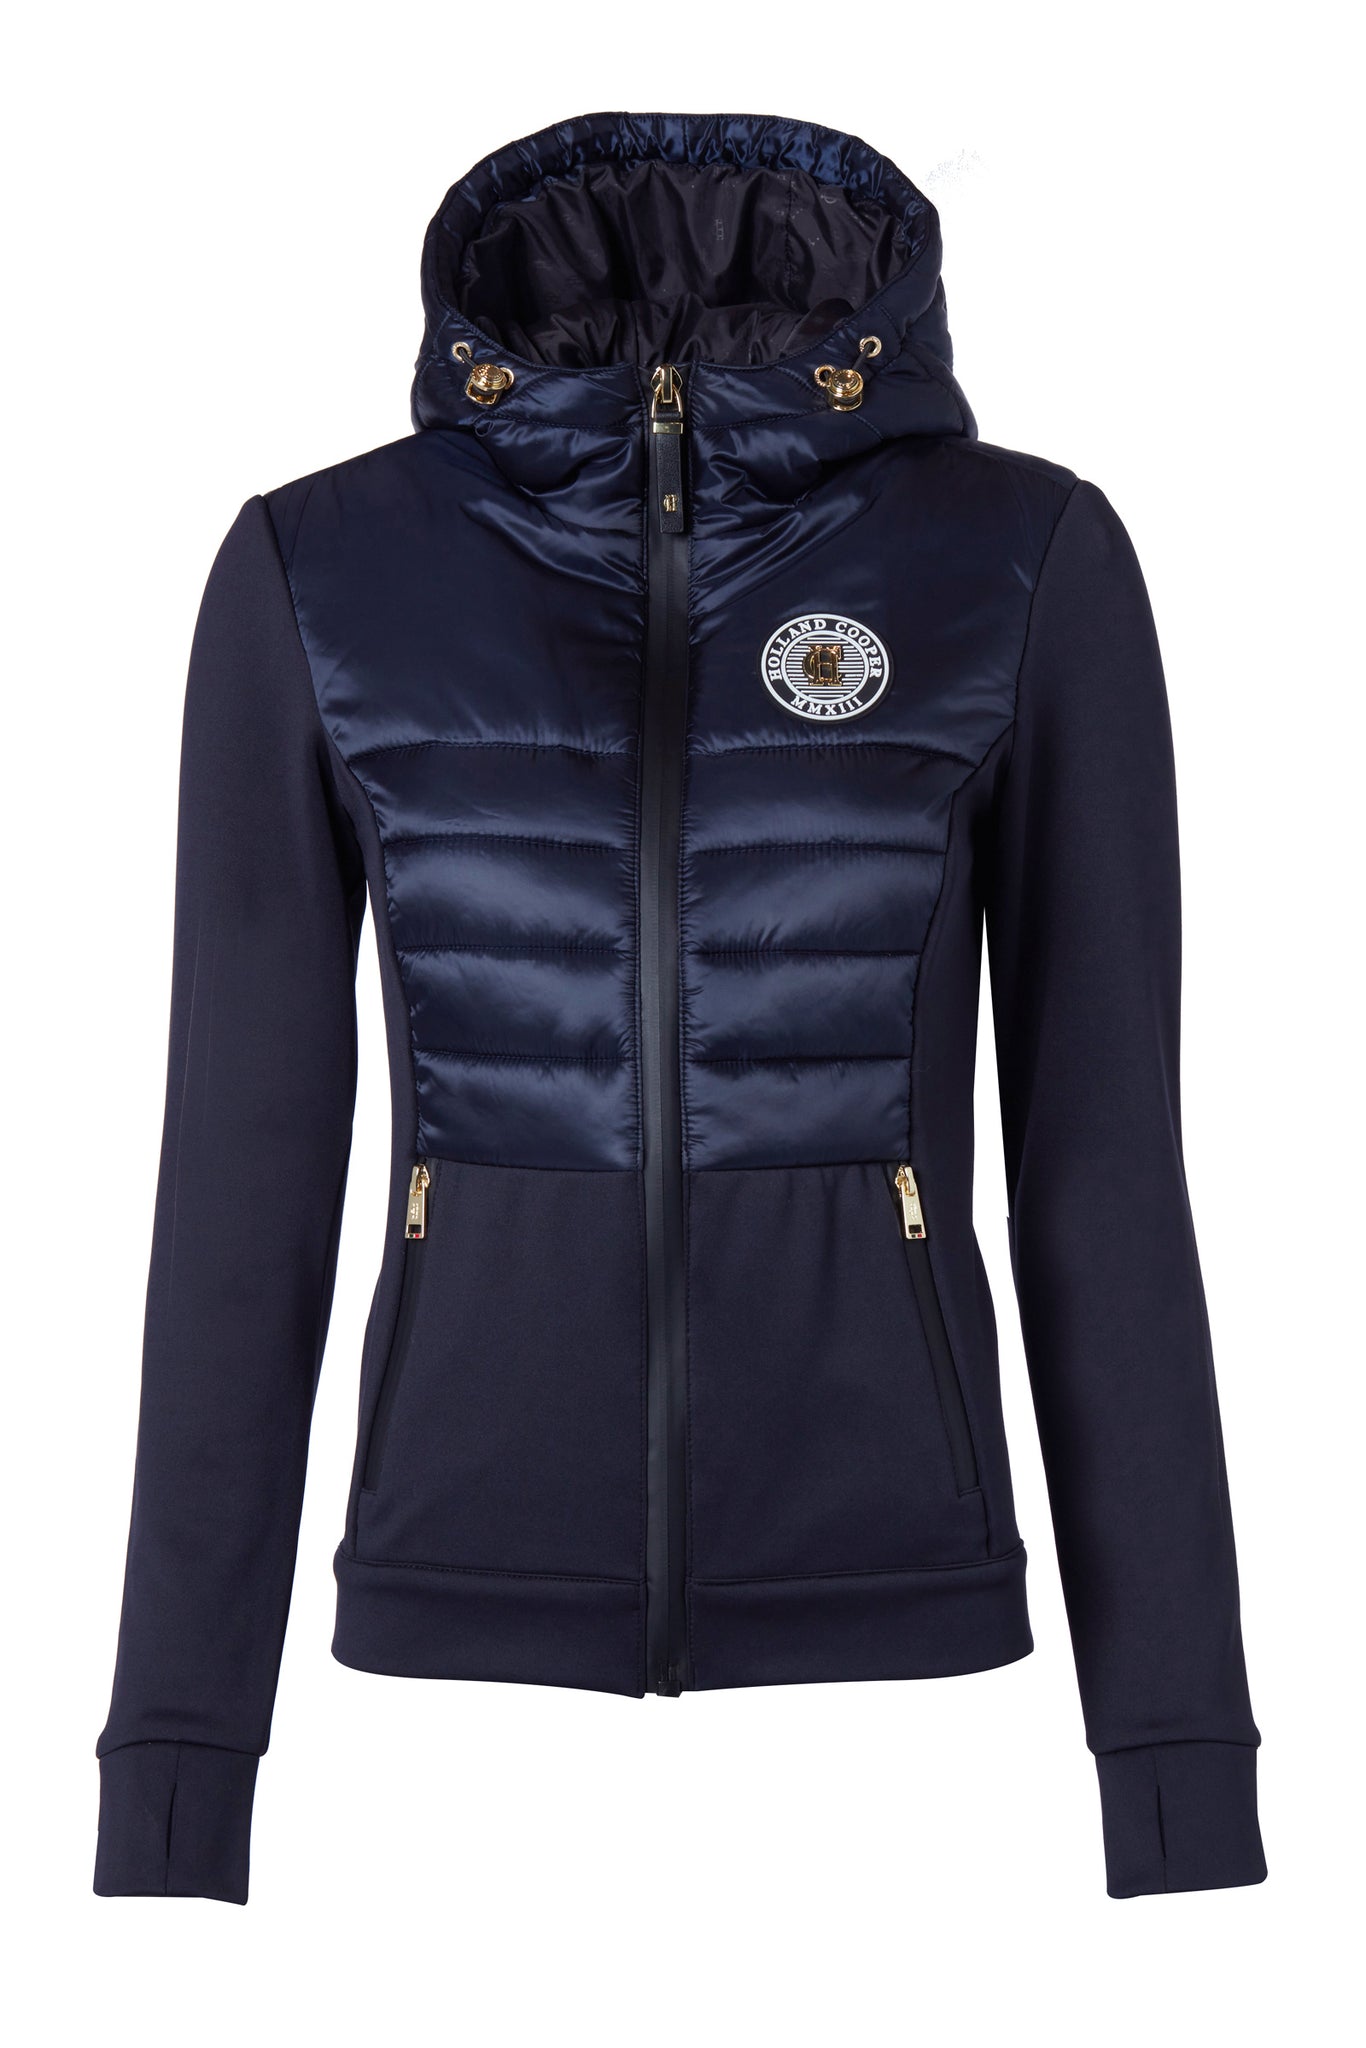 hooded hybrid jacket in navy with jersey panels on the waist and sleeves and Sorona eco down fill on hood front and back body panels finished with rubbed zip fastening in black and two side pockets with the same zip fastenings